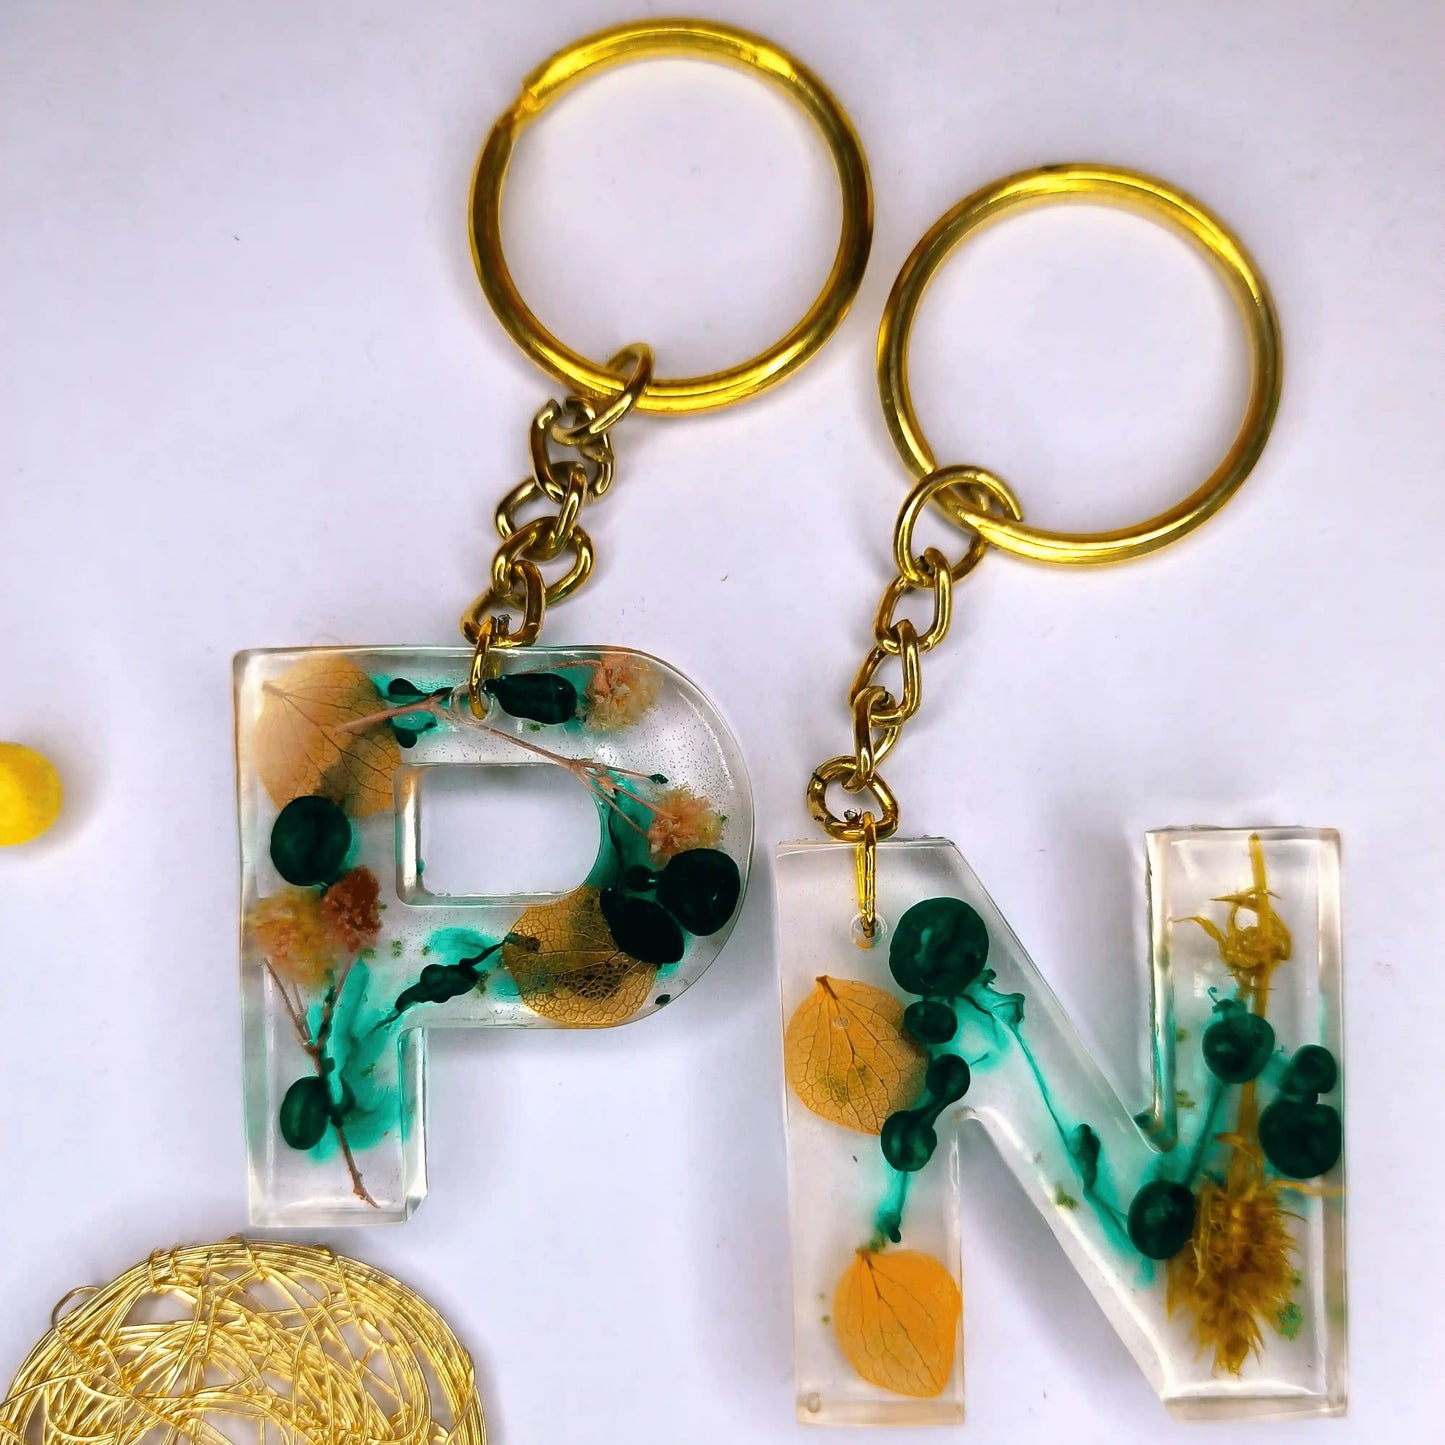 Modern Preserved Flowers Resin Keychains With Customizable Monogram For Men and Women Sale